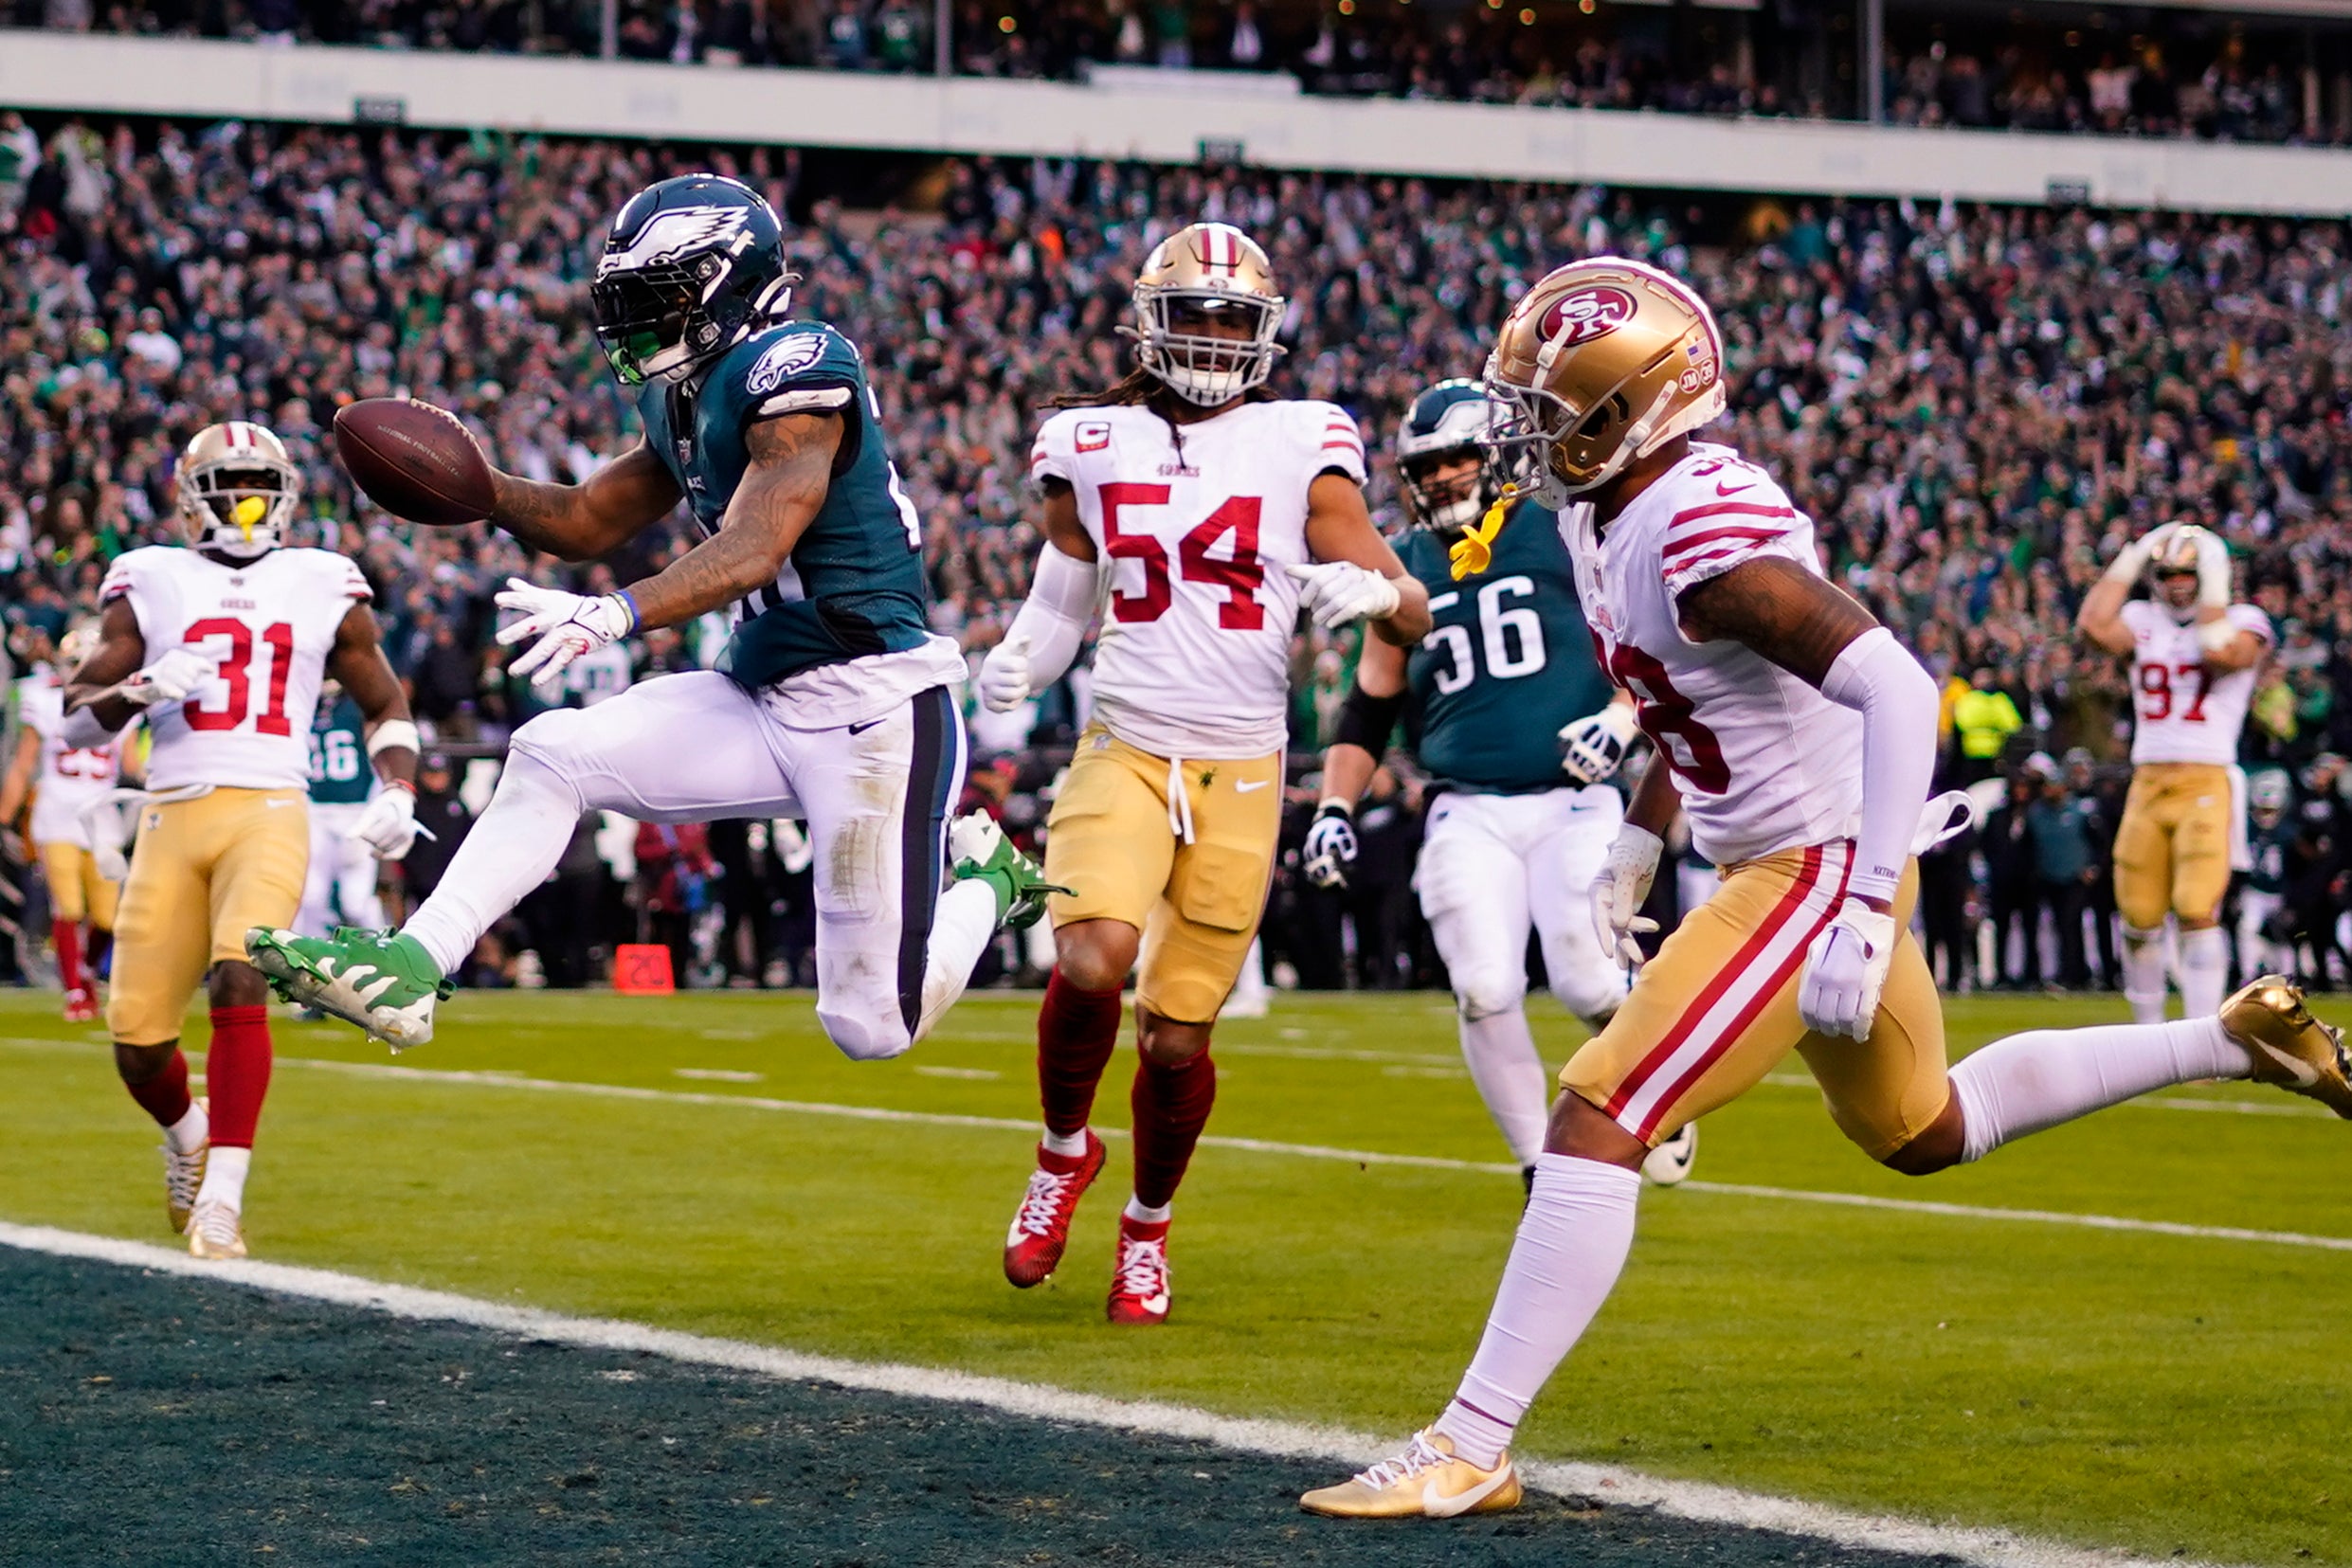 Philadelphia running back Miles Sanders celebrates after scoring during the first half of the NFC Championship game between the Eagles and the San Francisco 49ers in Philadelphia.